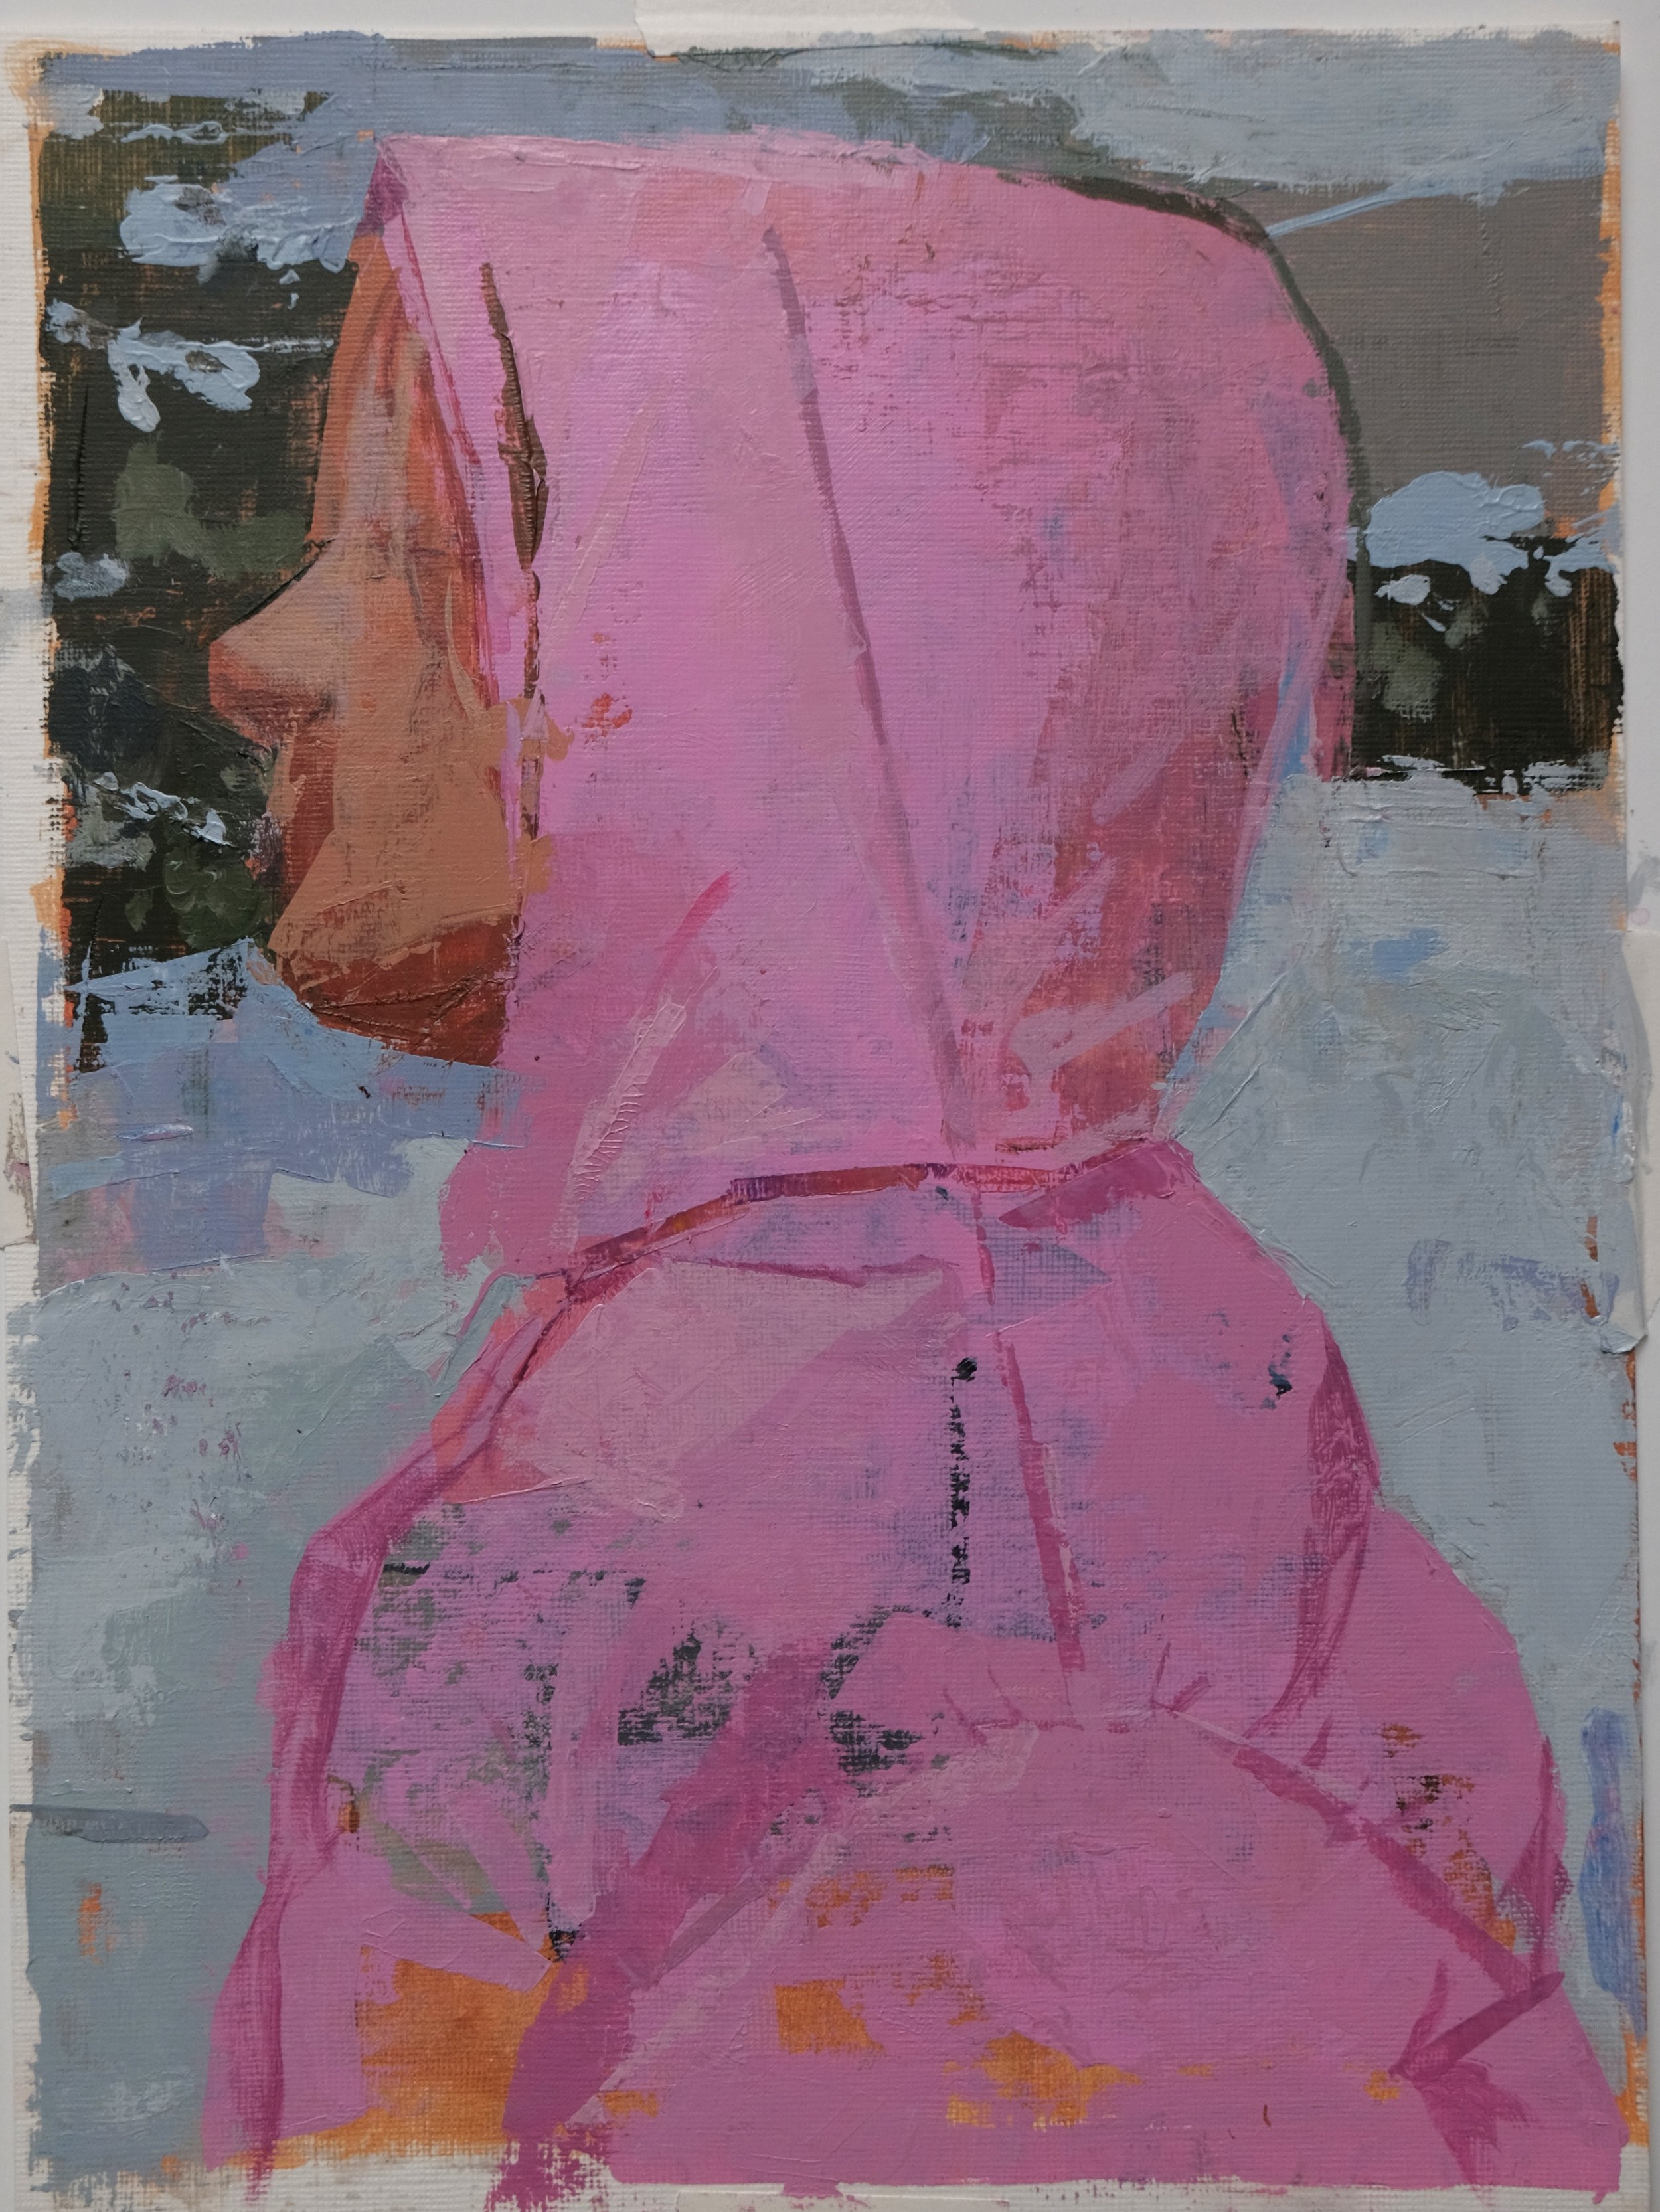 Pink Jacket Spring Snow acrylic on paper 9x12 inches amy scherer.JPG